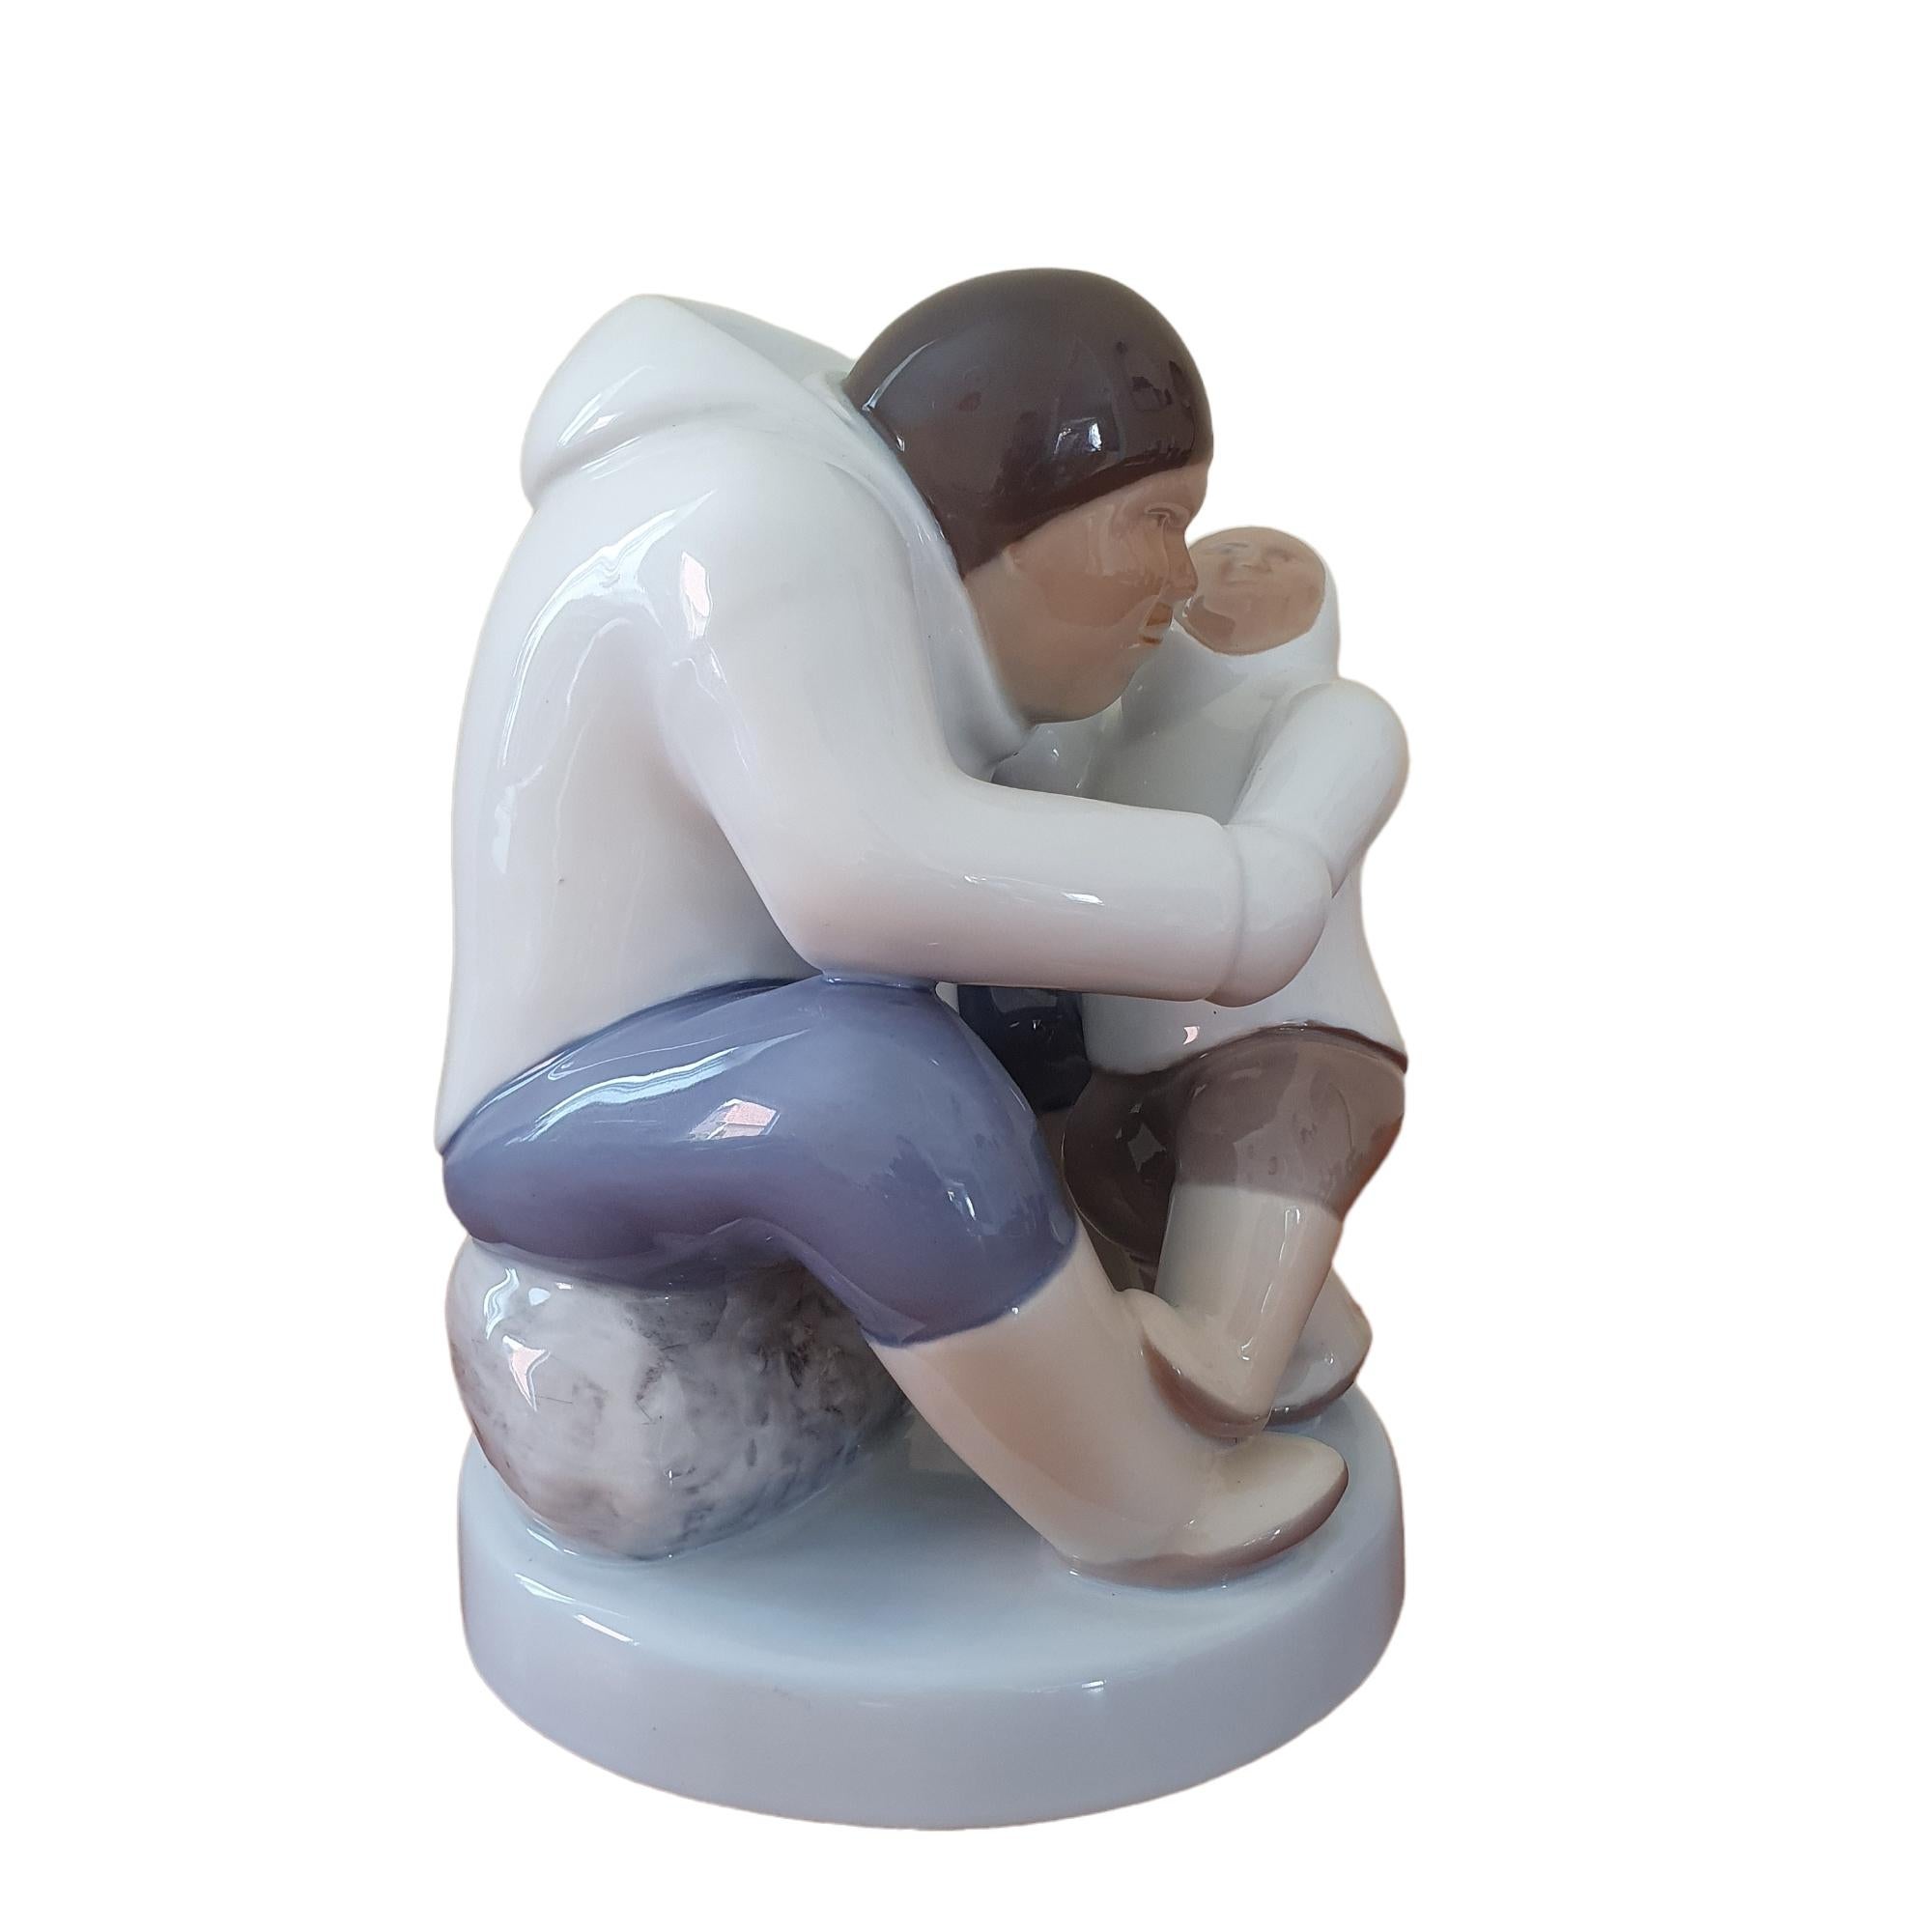 This relatively large Porcelain Figurine, designed by Karl Kristoffersen for Bing & Grøndahl is part of a series depicting Greenland and Inuit life. It is an homage to the indigenous people of Greenland to share with the rest of the world.

This